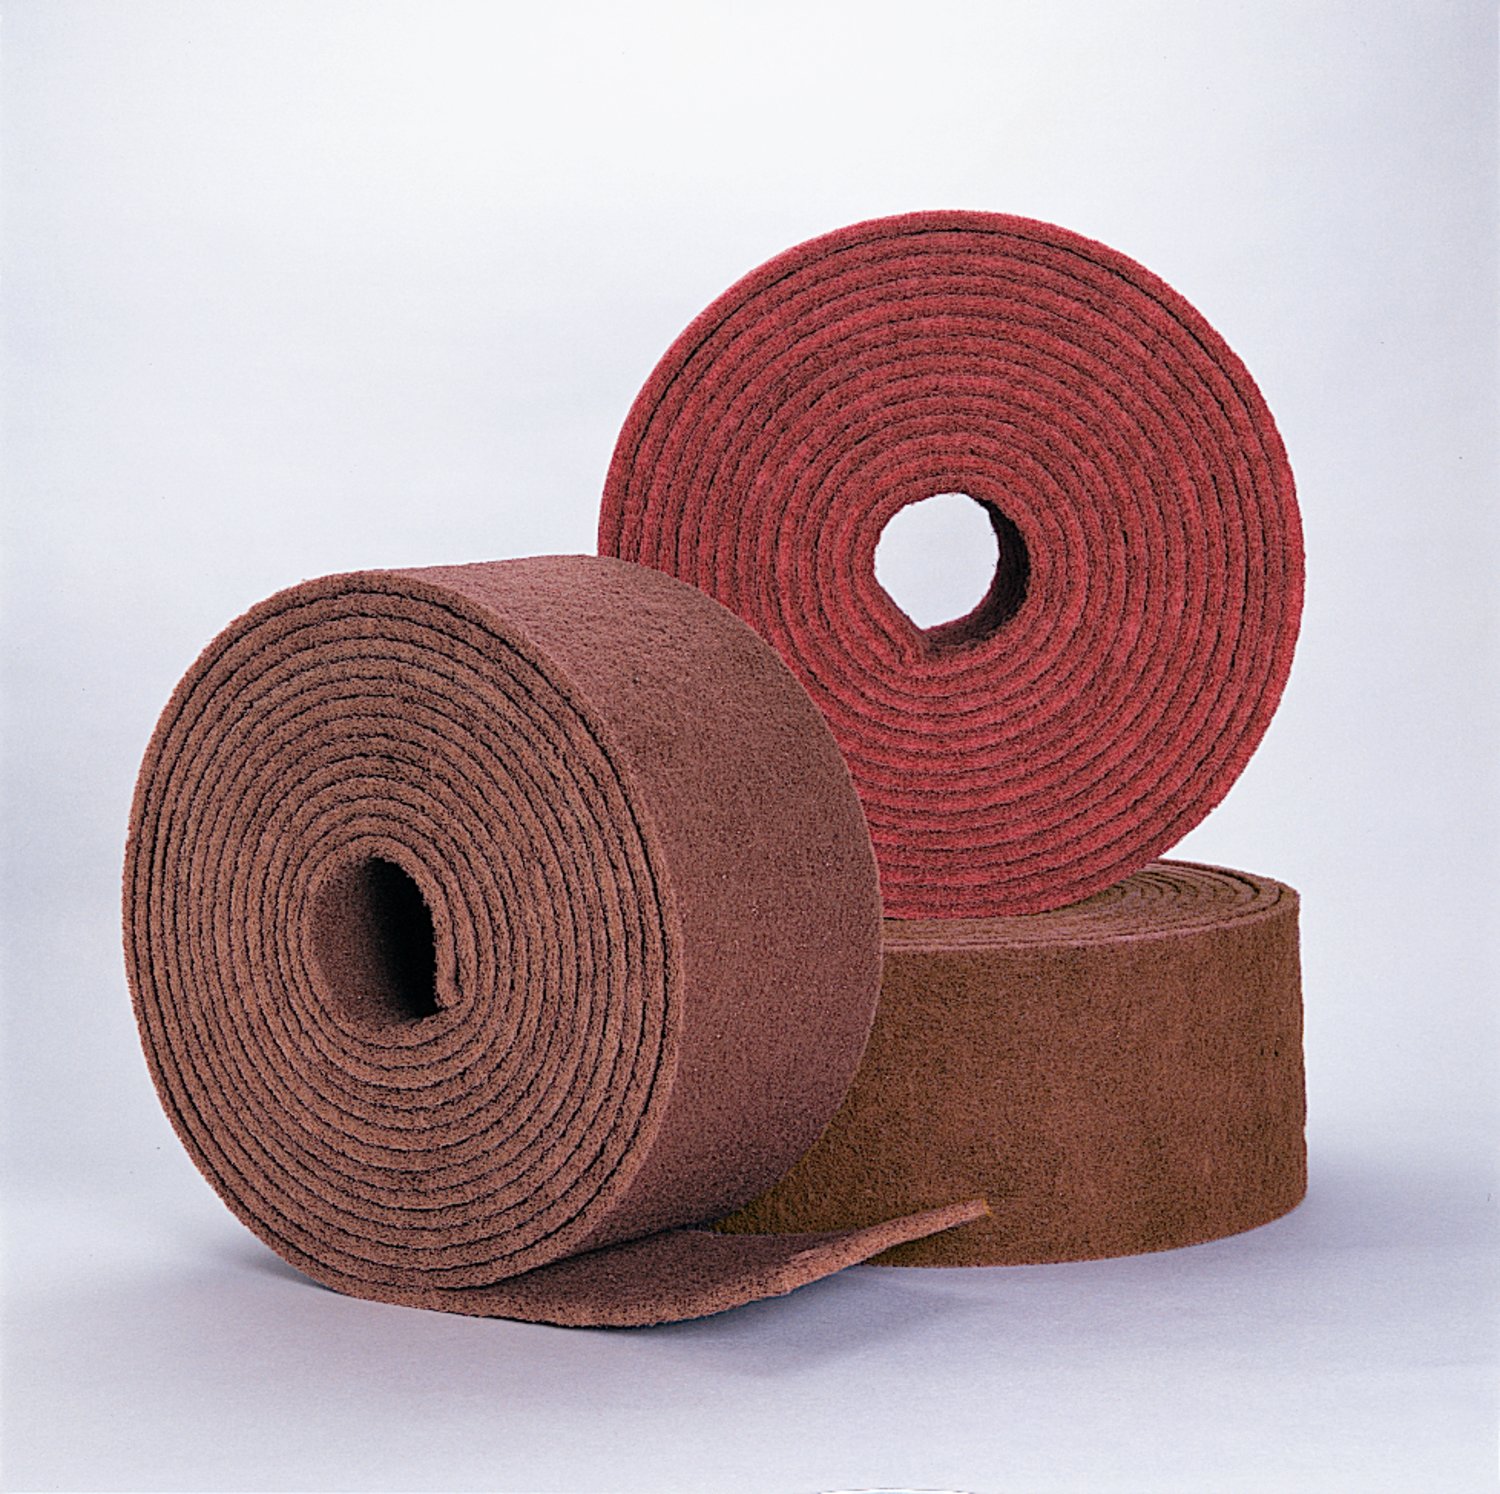 7100244417 - Standard Abrasives Surface Conditioning RC Roll, 015183, A/O
ExtraCoarse, 50 in x 25 yd, Roll, 4 ea/Pallet